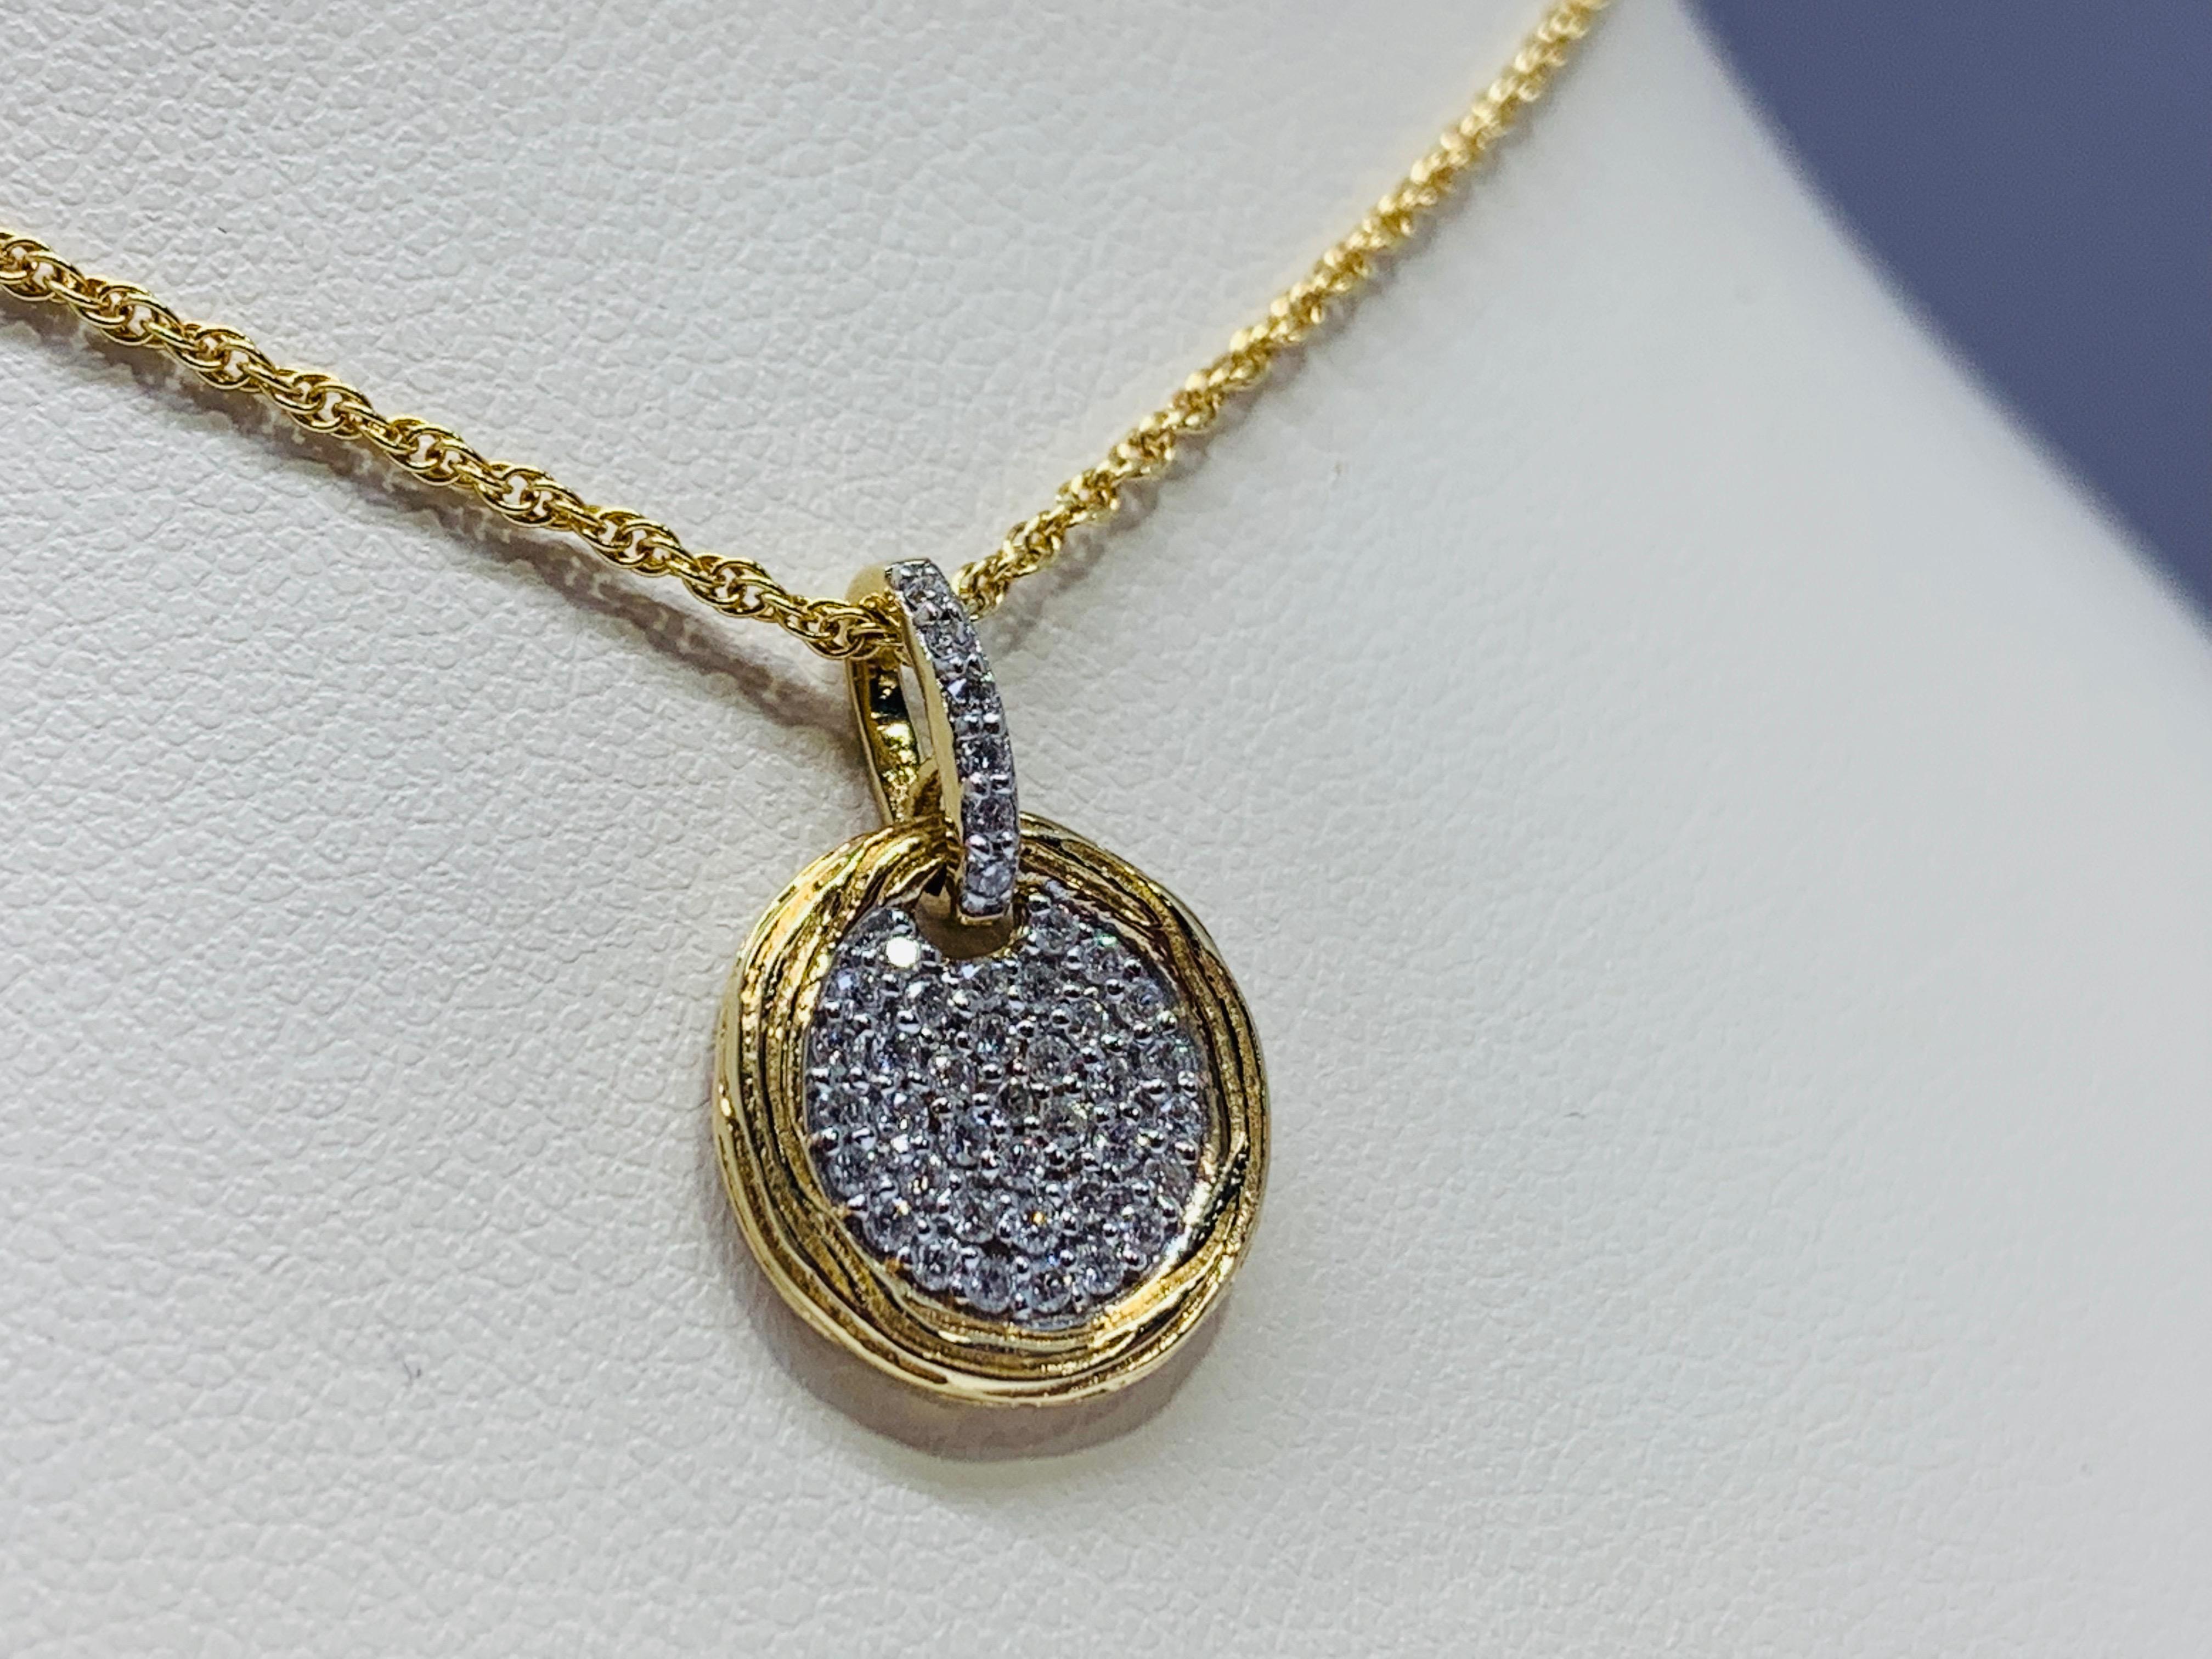 This stunning necklaces is made out of 14k yellow gold and holds a total round diamond weight of 0.25 carats. This necklace includes a sturdy 18 inch rope chain with a secure lobster claw clasp. The pendant itself is 0.5 inches wide and the chain is